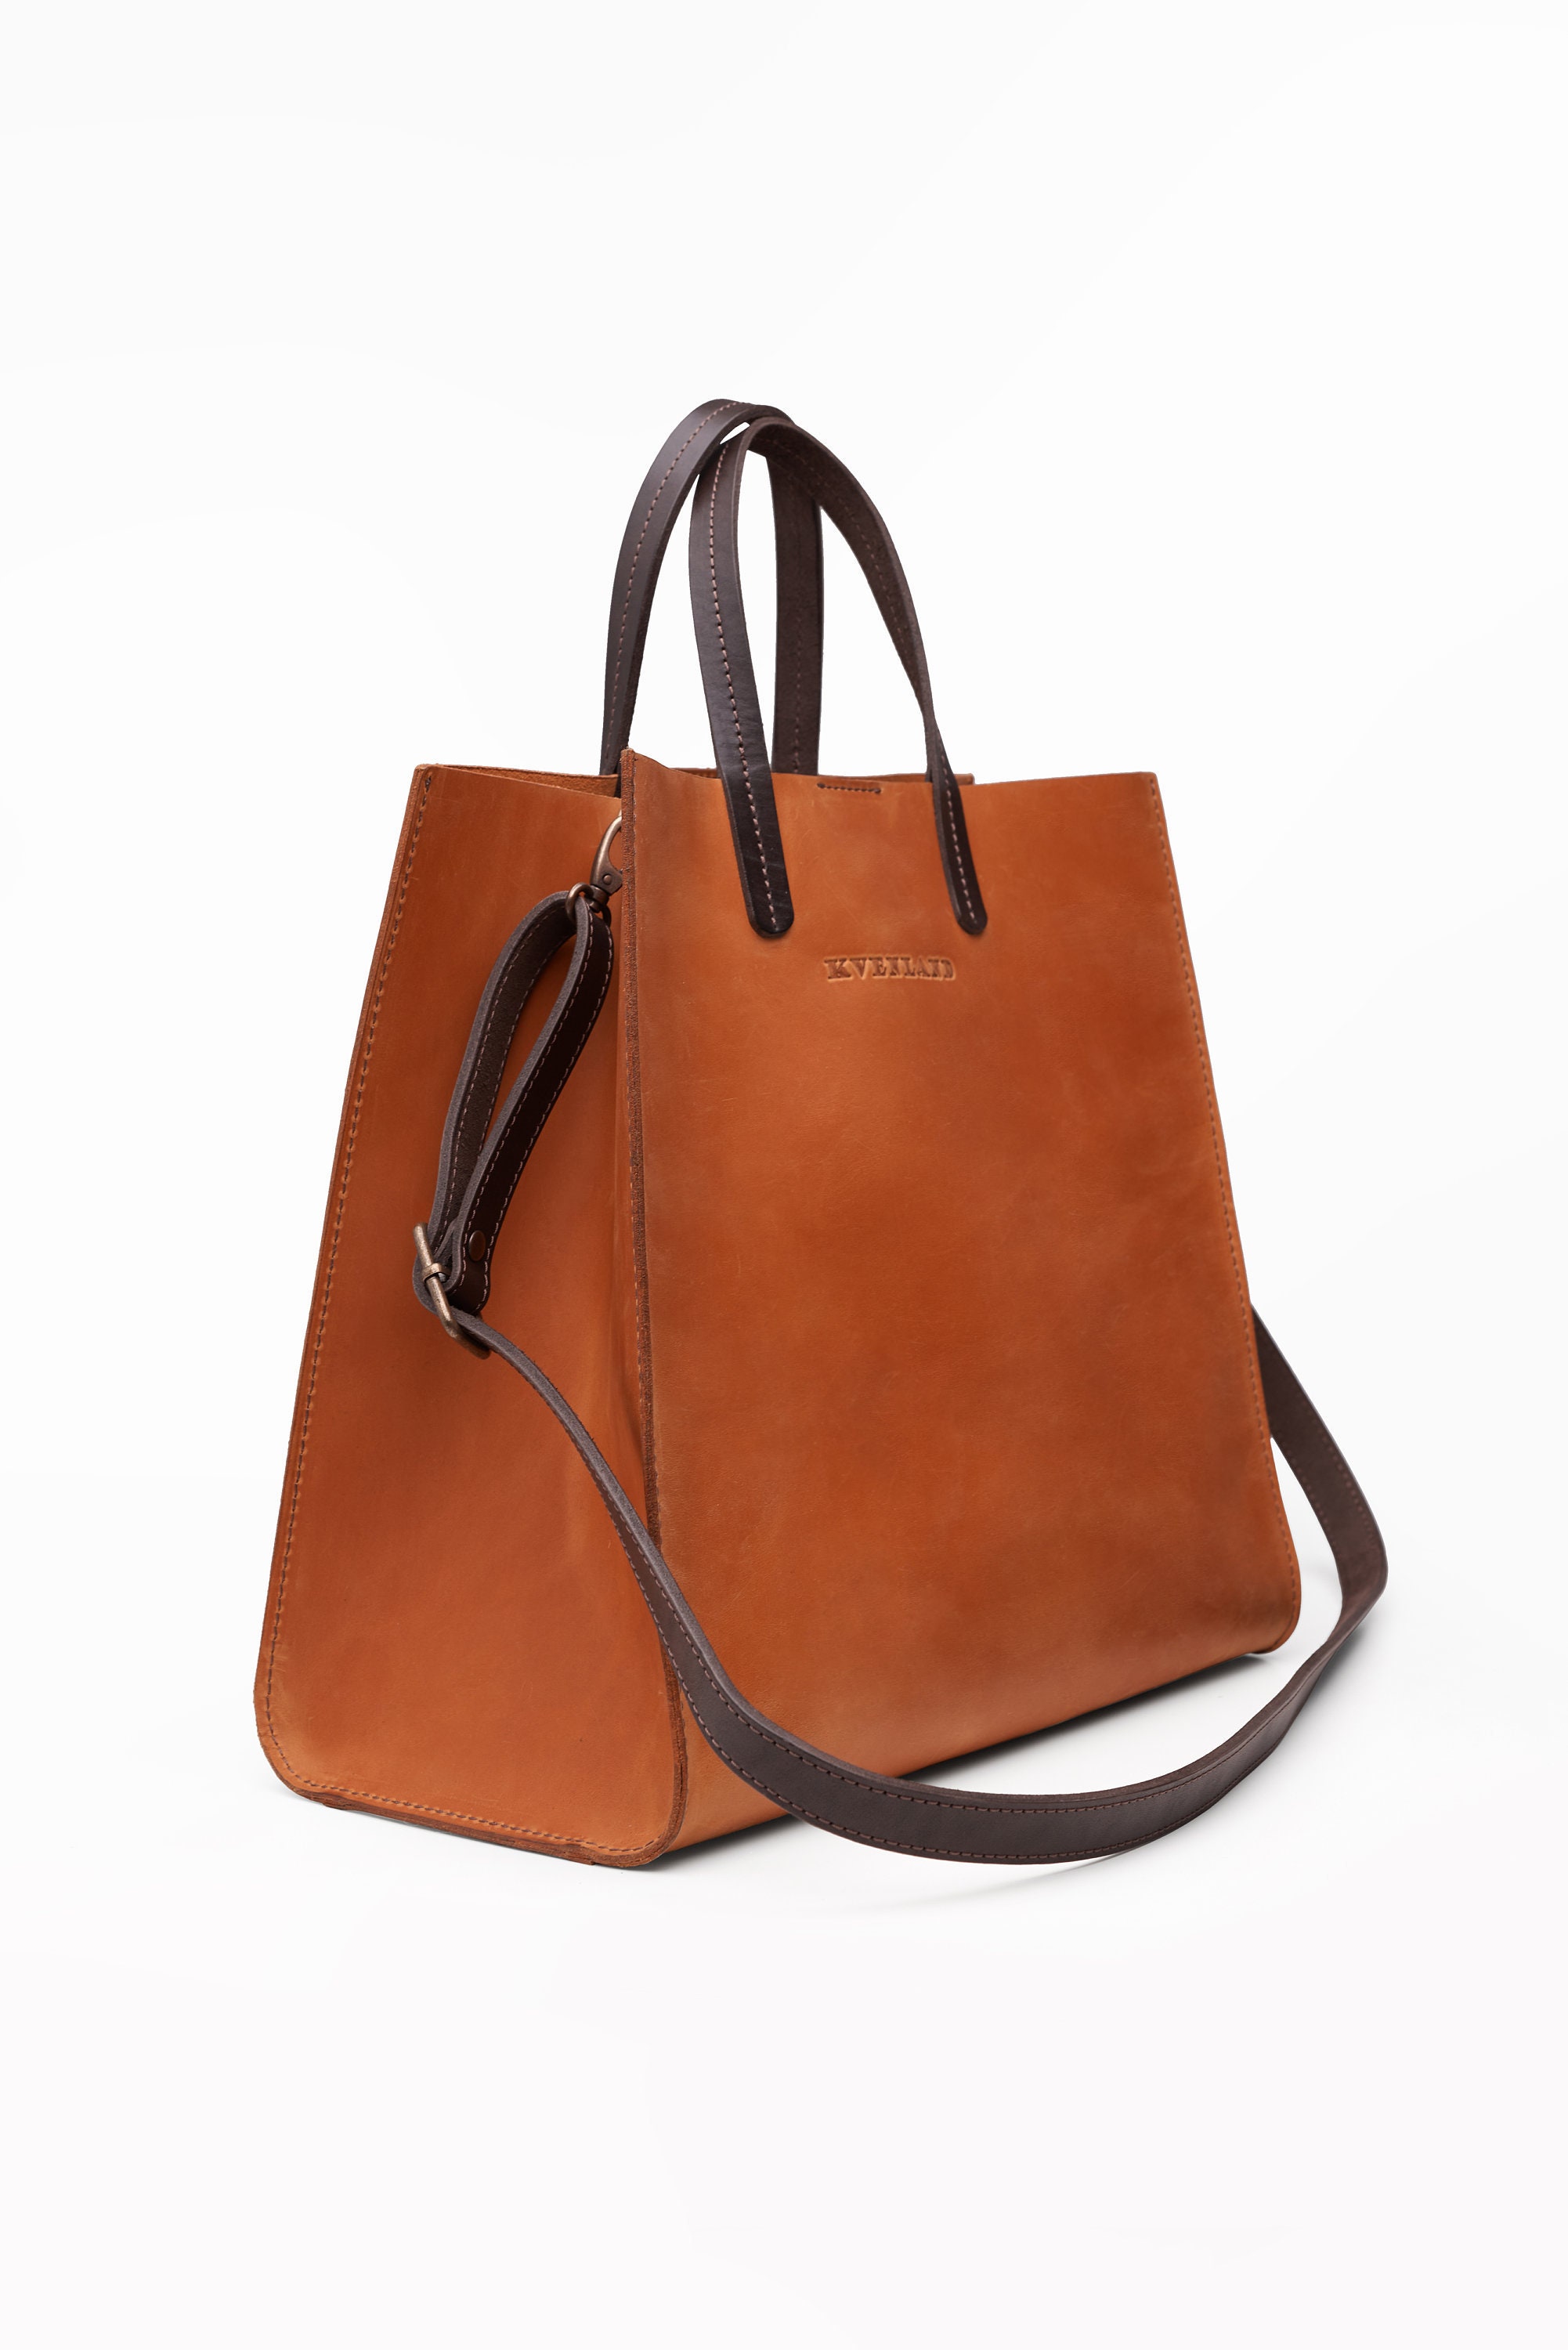 Greco Baguette bag with shoulder strap and zip made of real suede Color  Caramel